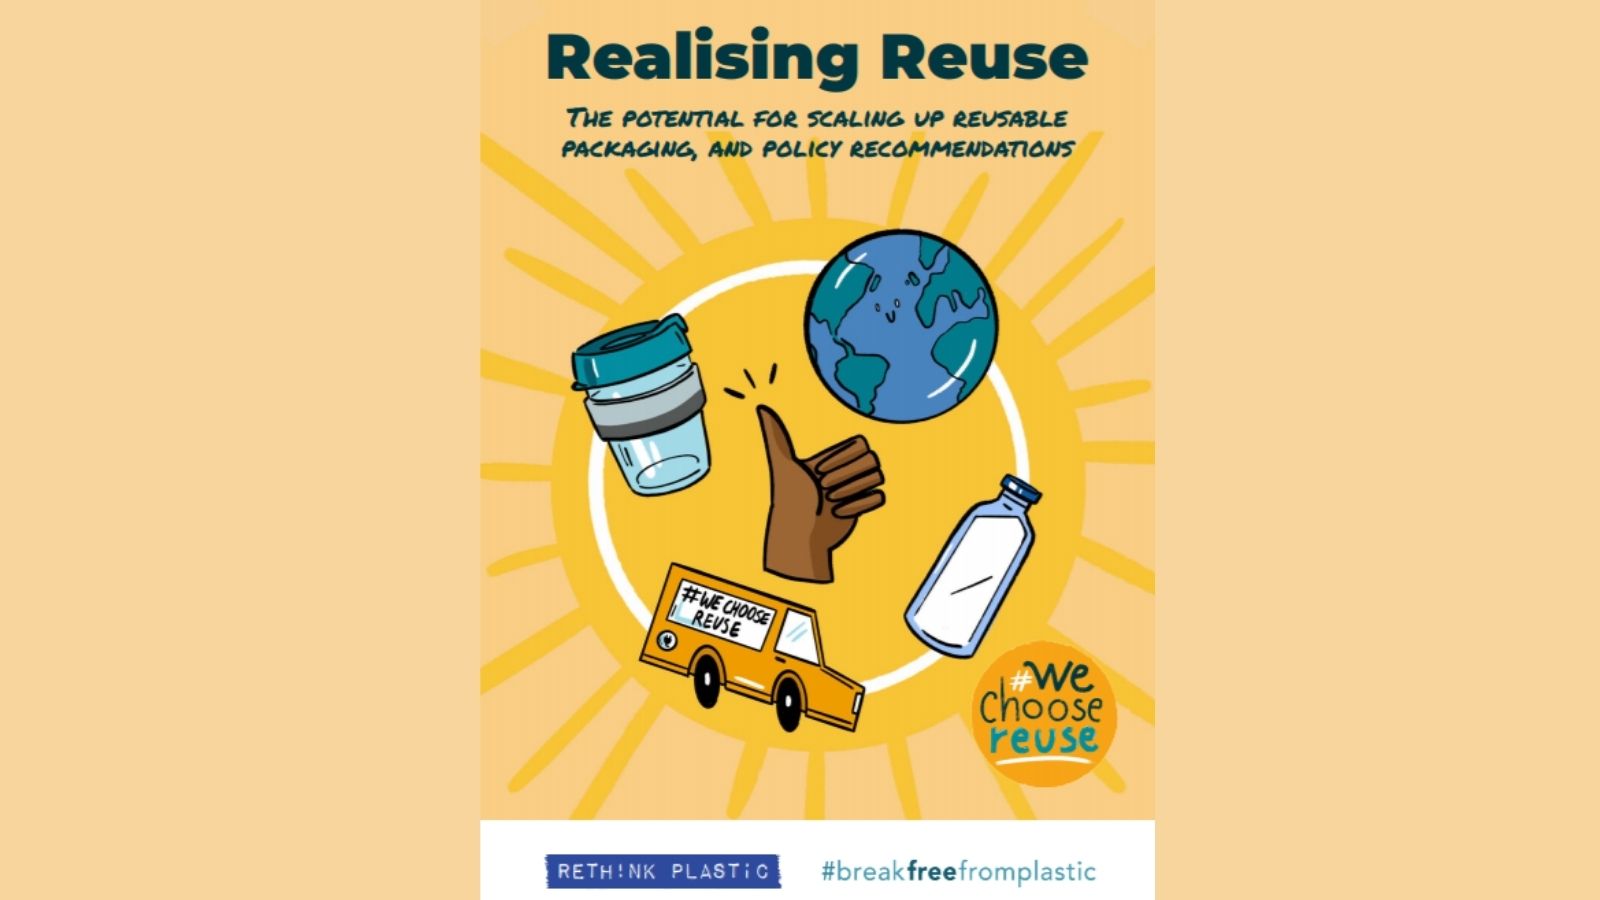 Reuse Report: reusable packaging target of 50% by 2030 in key sectors could reduce 3.7 million tonnes of CO2 and other significant amounts of water, energy and resources